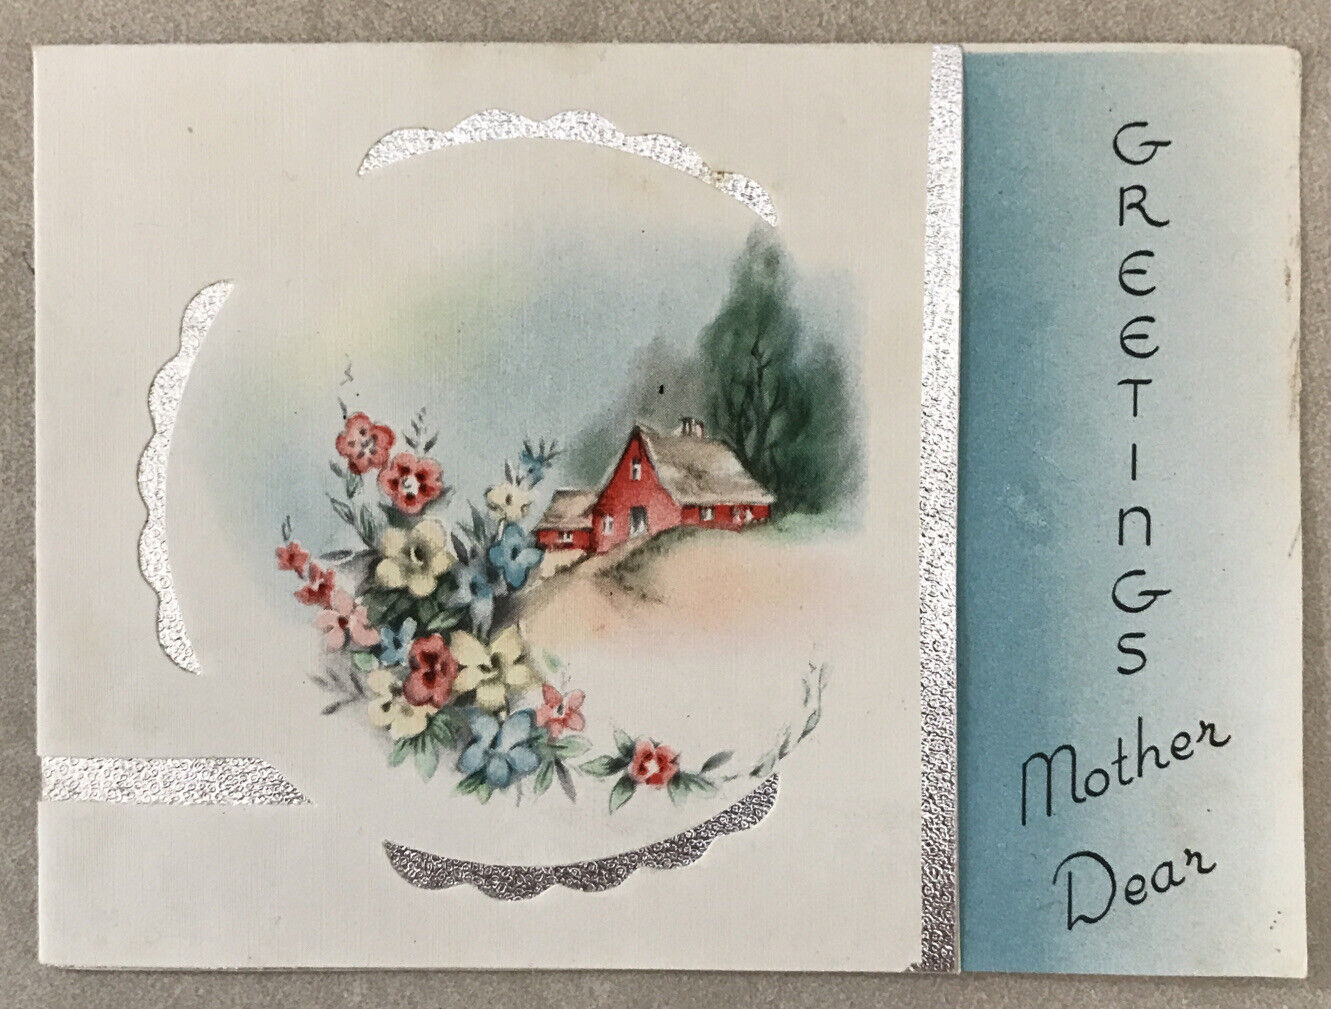 Vtg 1930s Greetings Mother Dear Blank Card Floral Country Barn Design